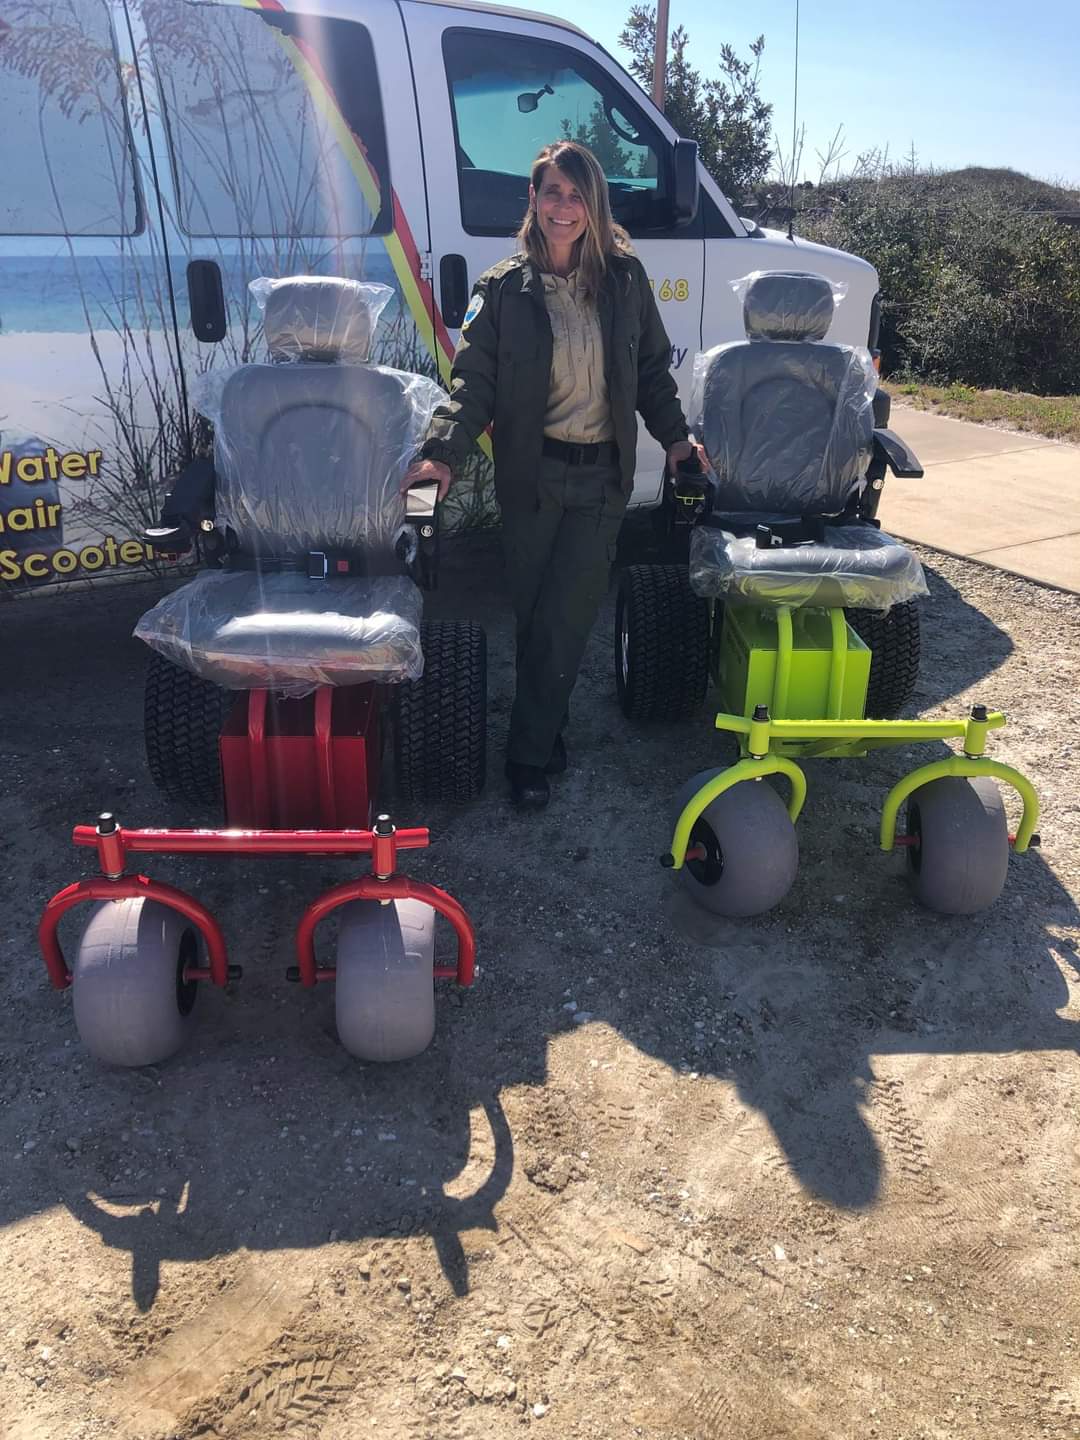 Manager Stephanie McDonald stands with two motorized beach wheelchairs.